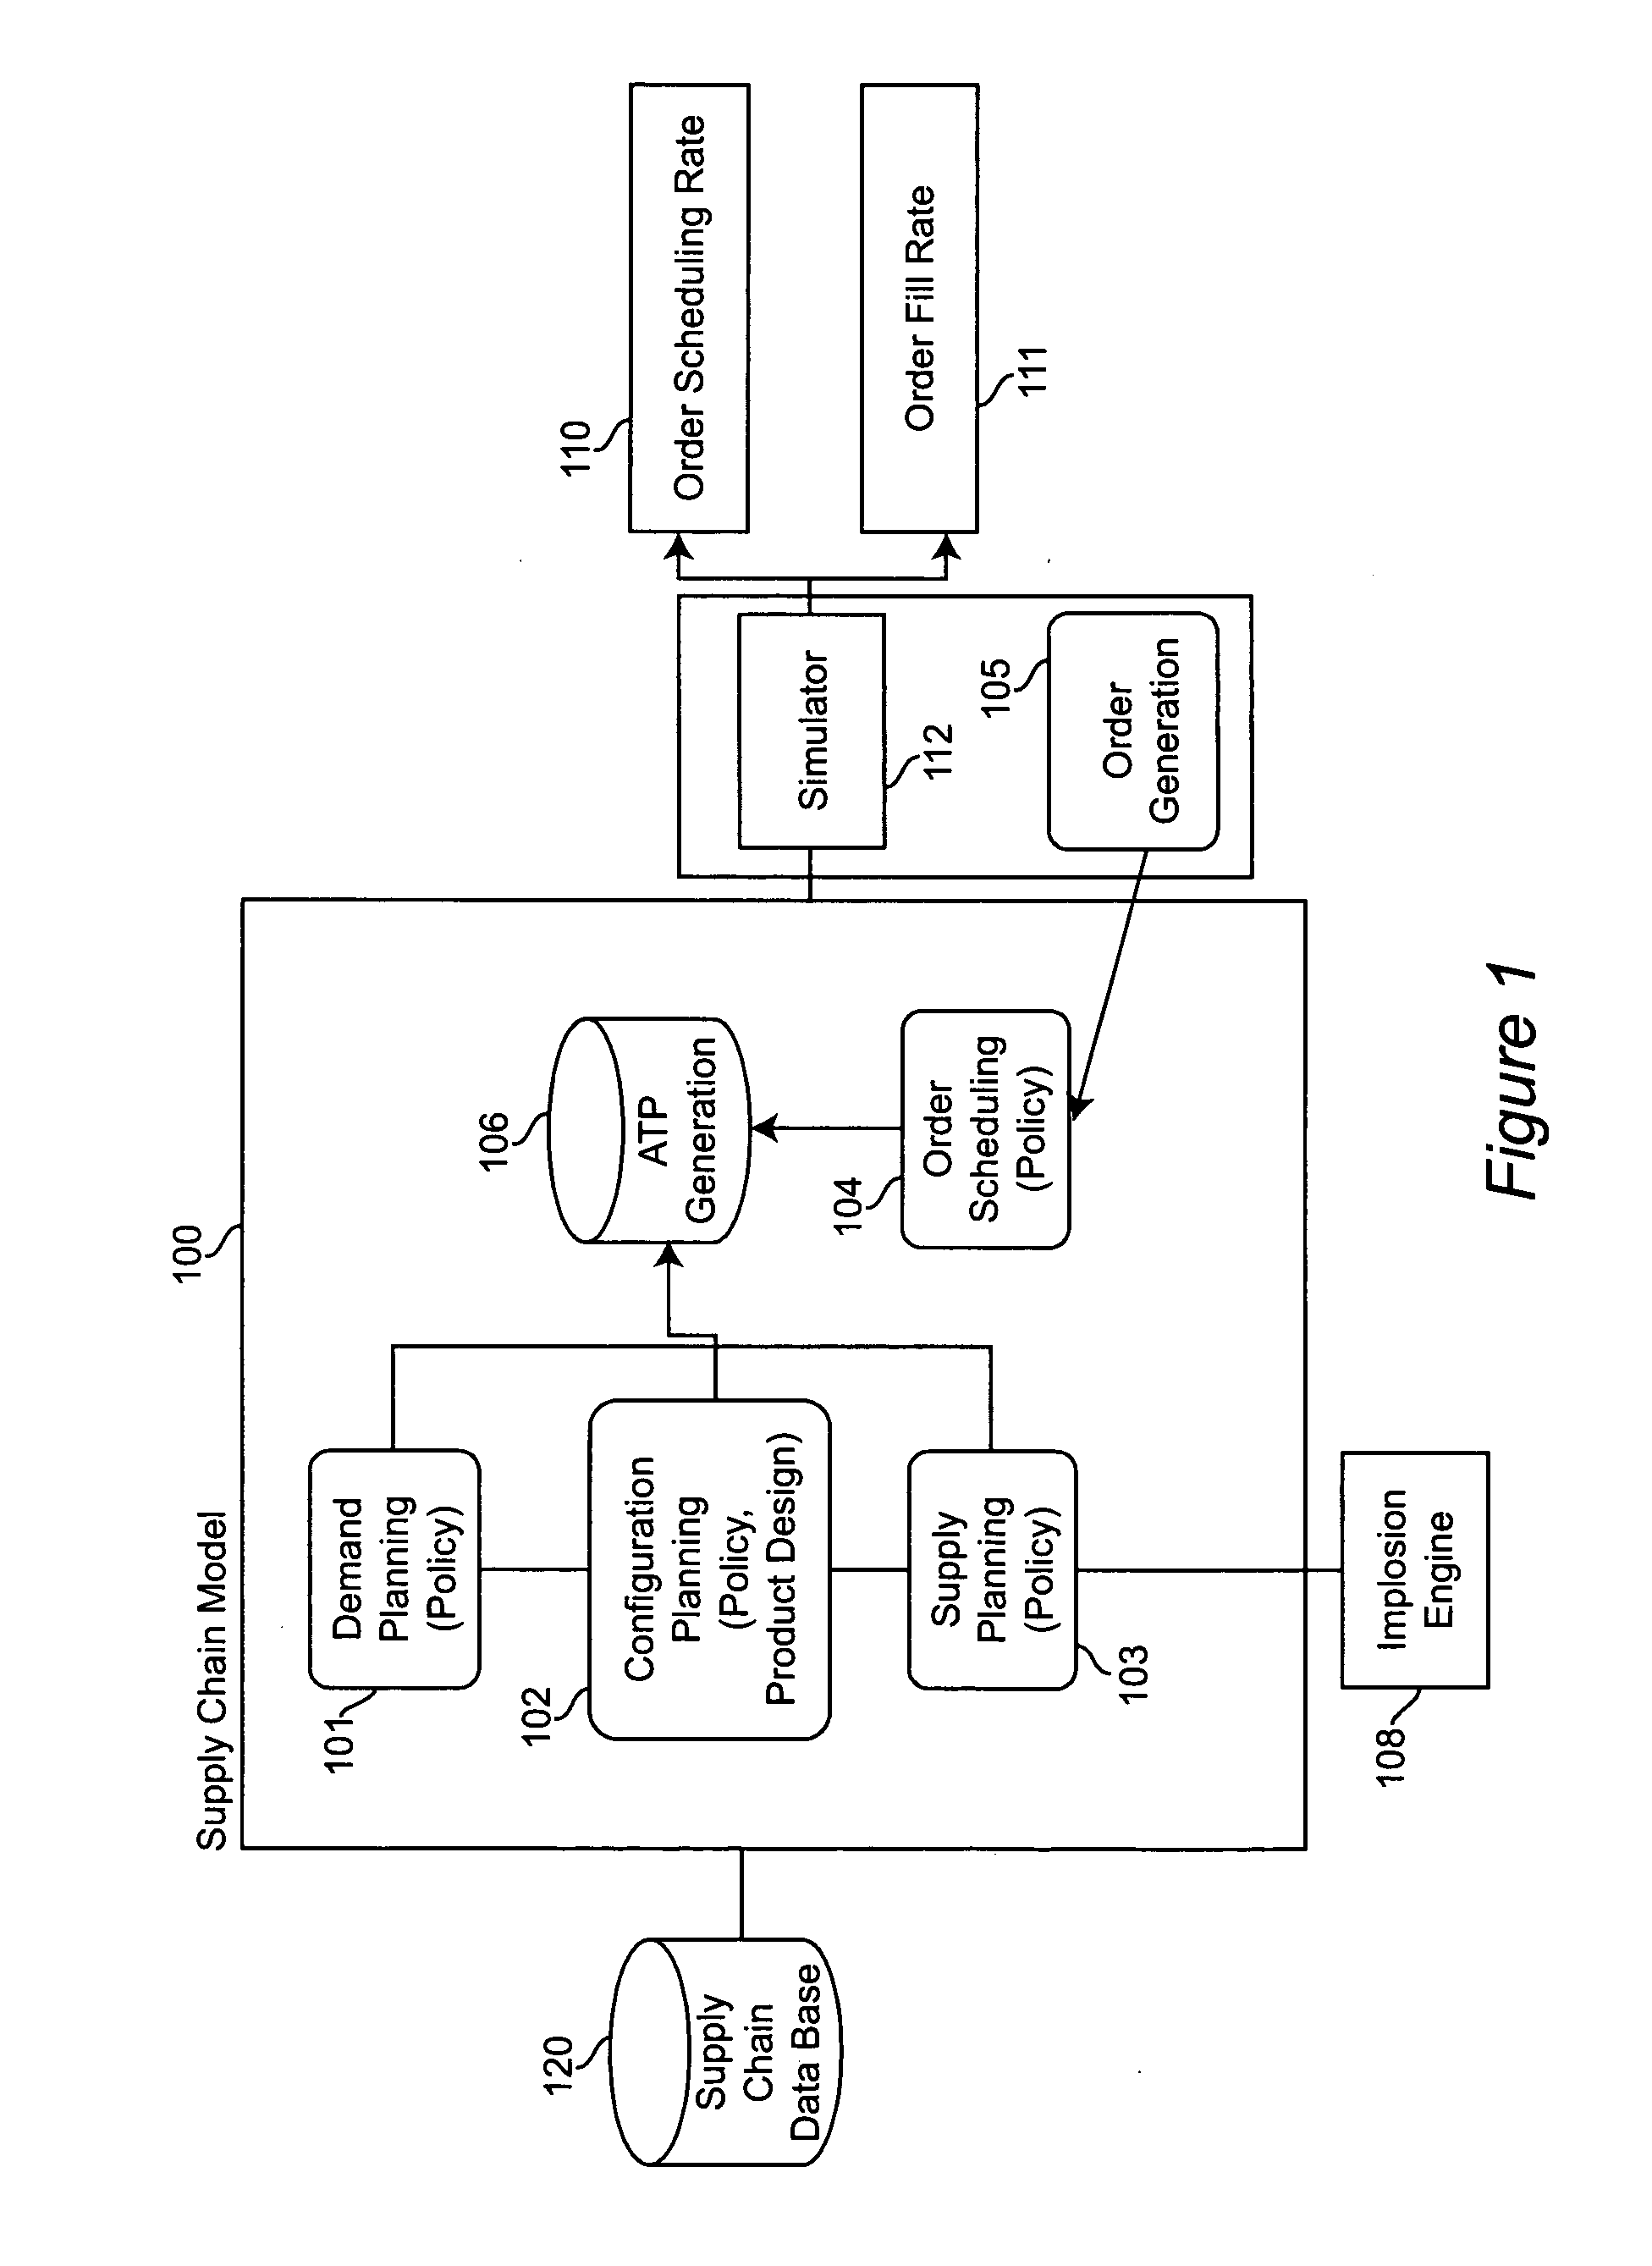 Method and system for estimating order scheduling rate and fill rate for configured-to-order business